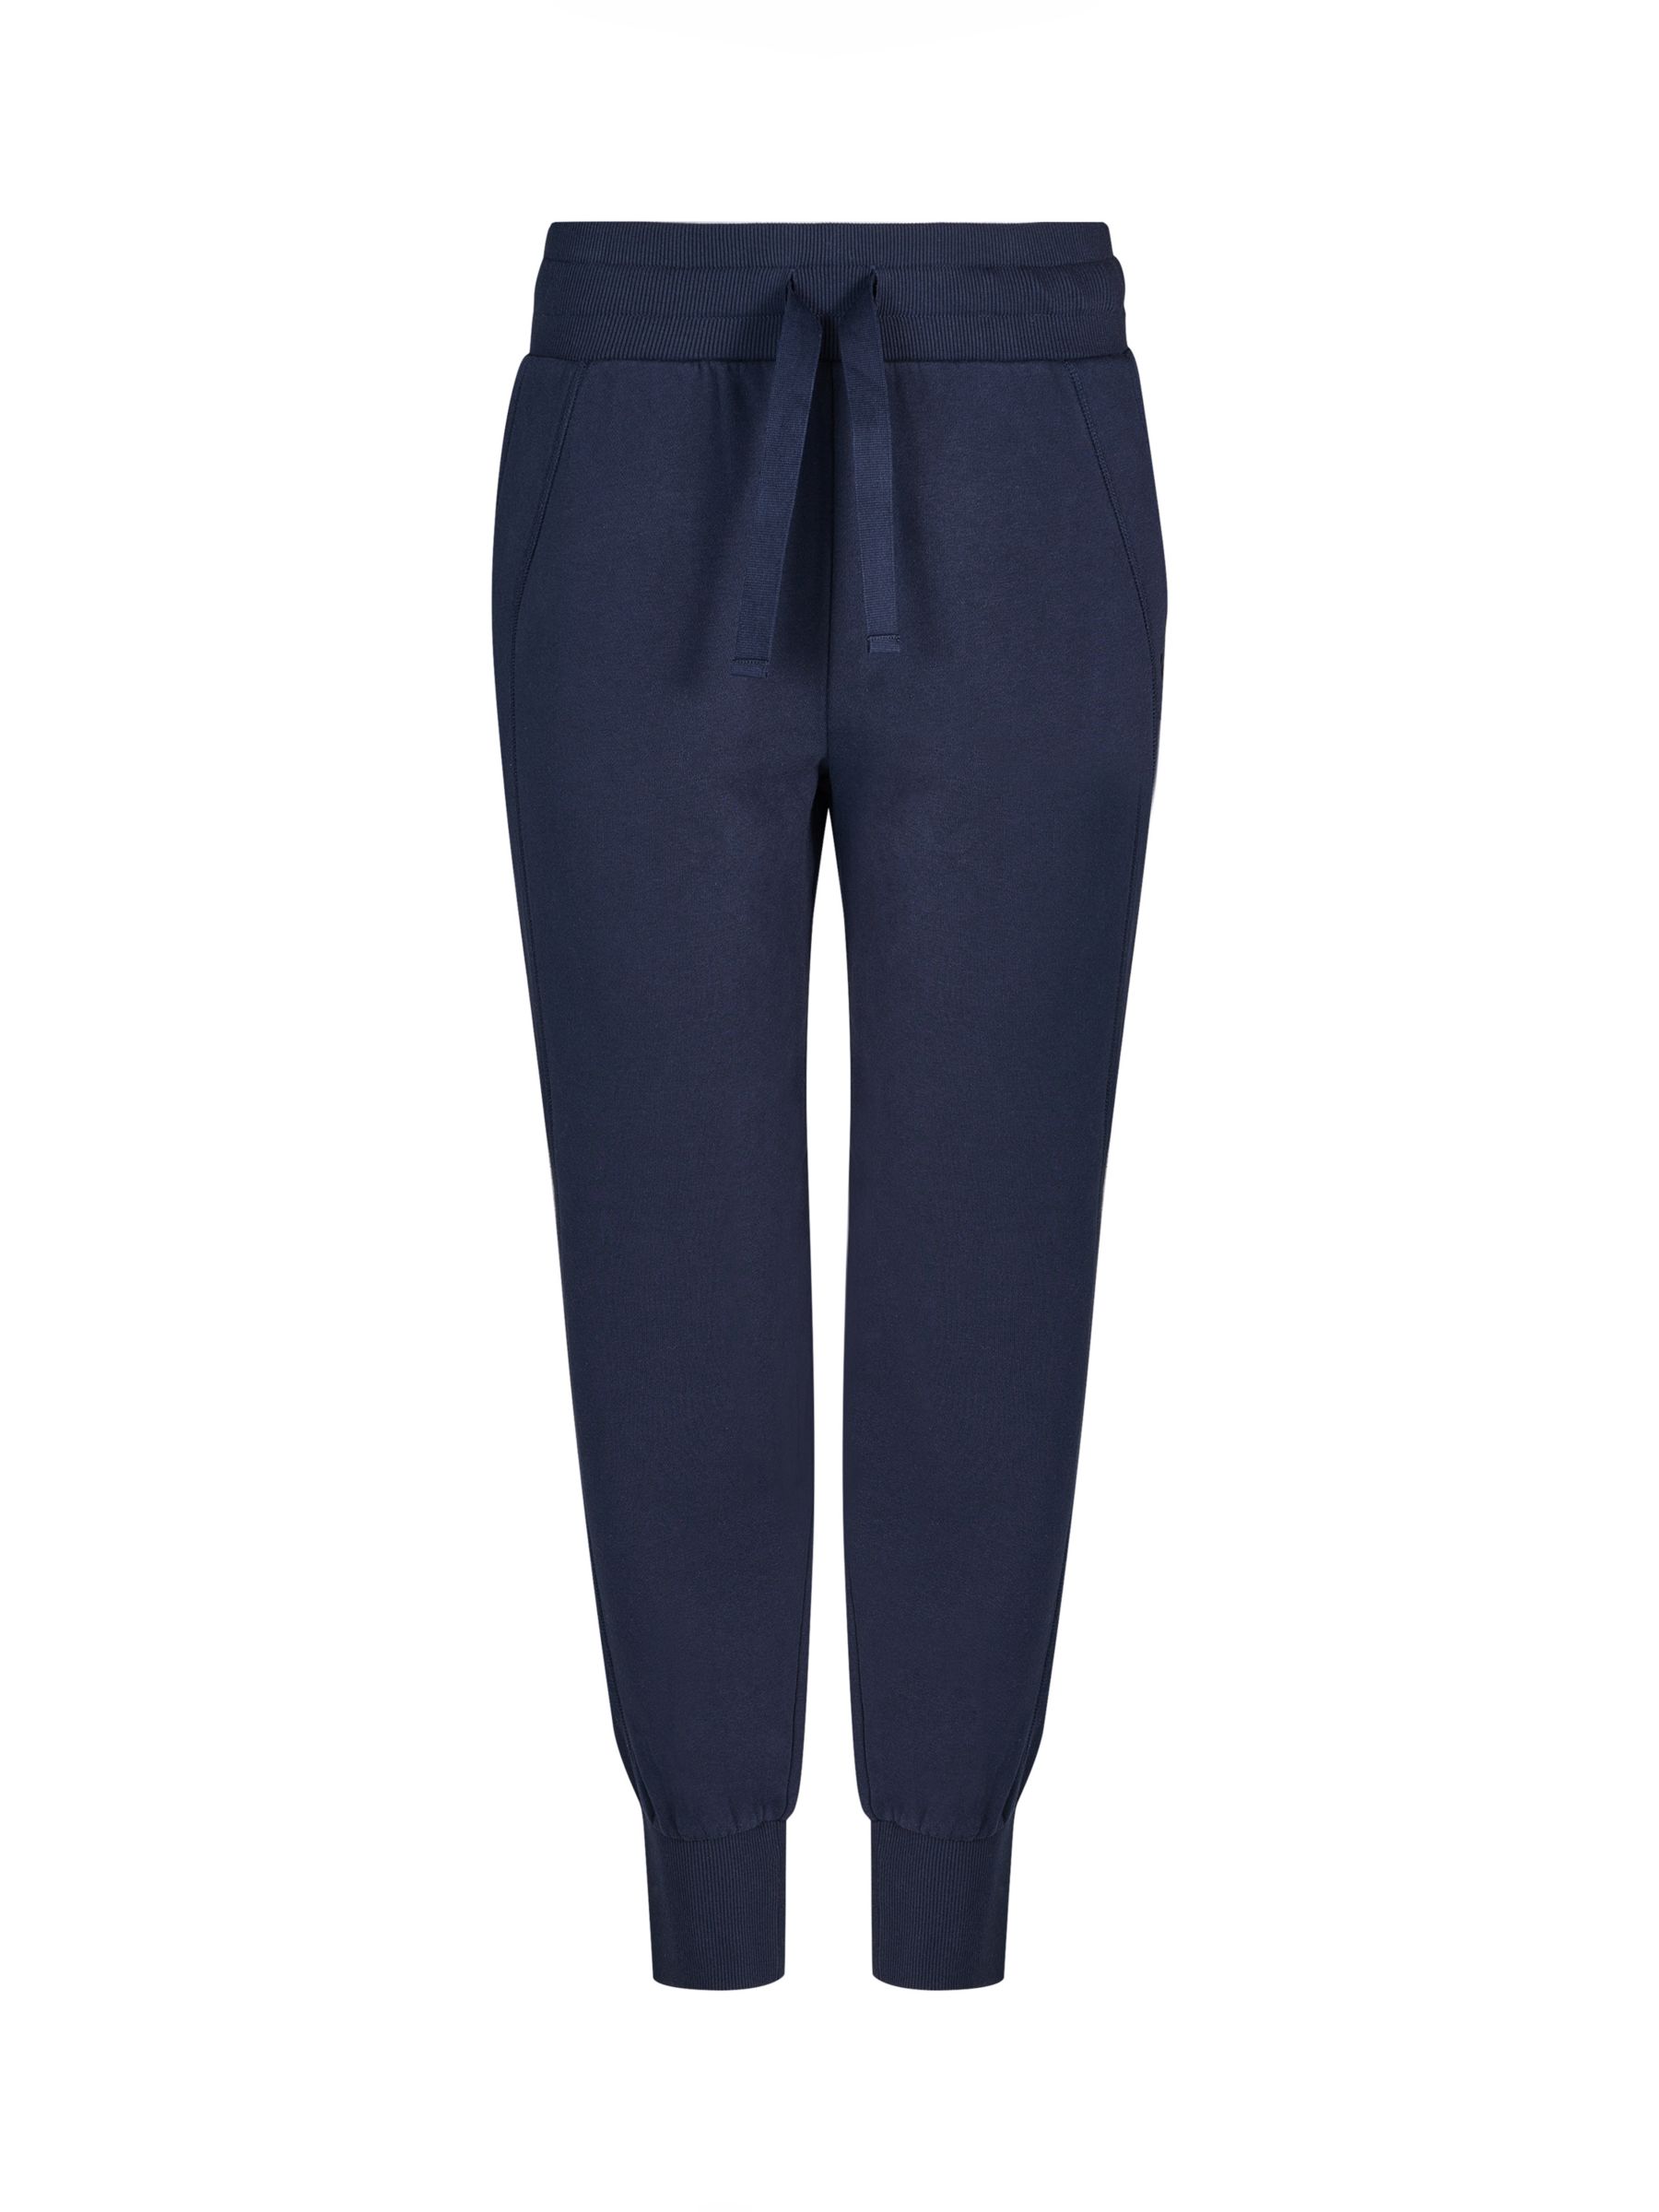 Sweaty Betty Revive Cuffed Jogger, Navy Blue at John Lewis & Partners